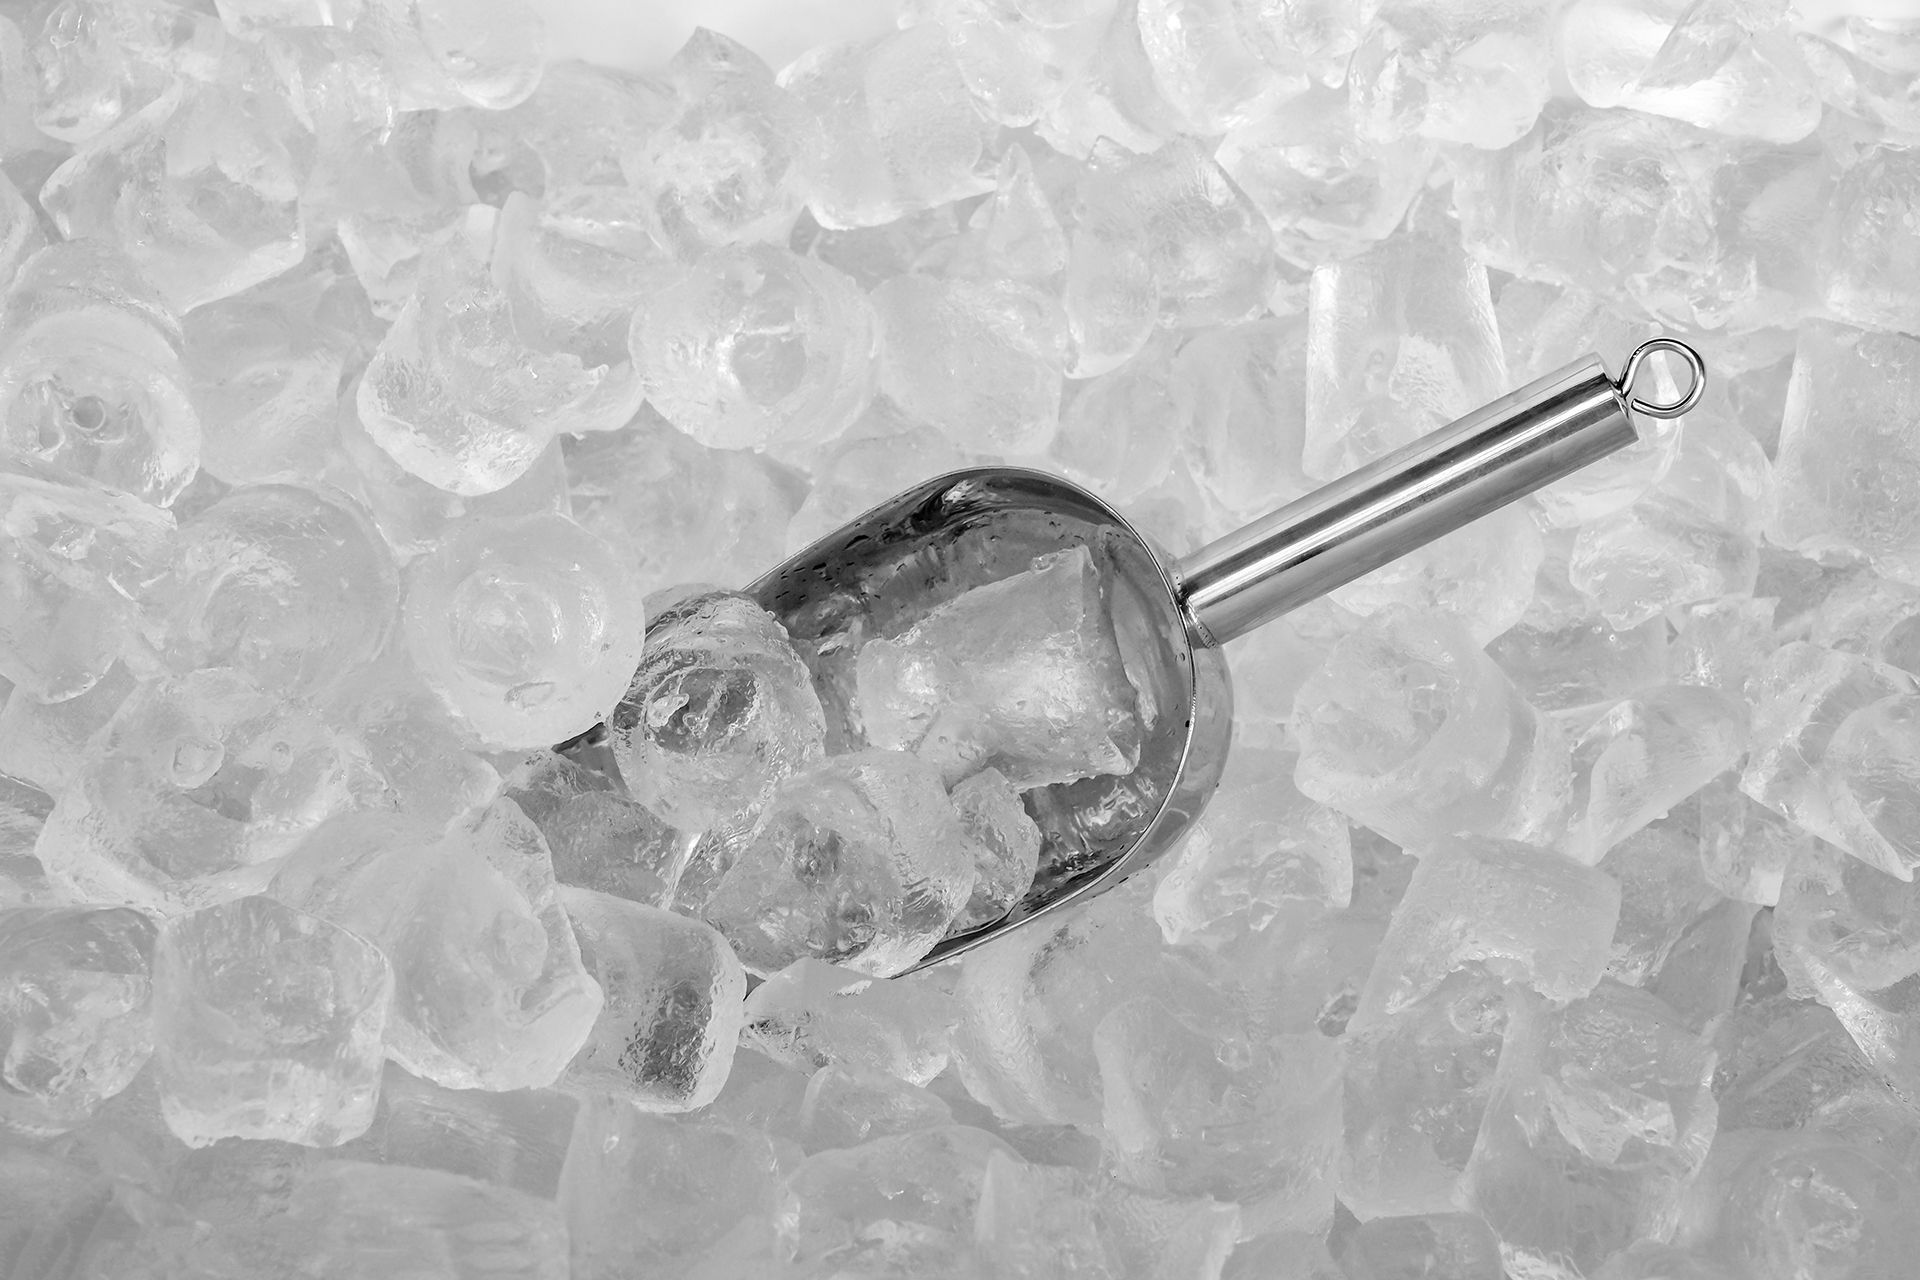 Scooping Ice Cubes